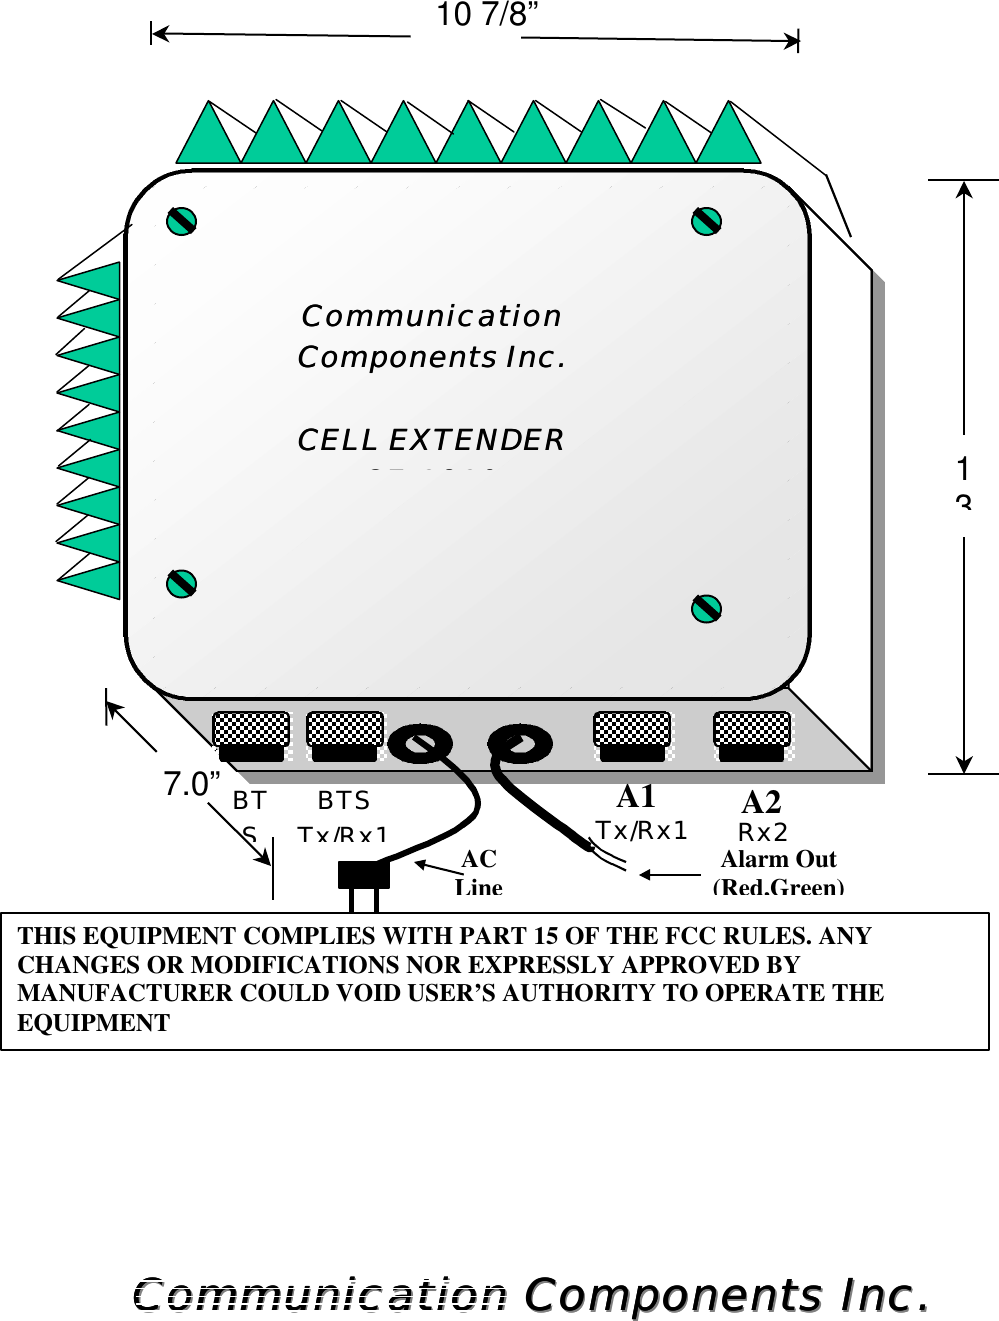                                              Communication Components Inc.Communication Components Inc.Communication Components Inc.Communication Components Inc.     1310 7/8”7.0”CommunicationCommunication  Components Inc.Components Inc.   CELL EXTENDERCELL EXTENDER CECE--18191819    Tx/Rx1 A1BTS Tx/Rx1 AC Line Alarm Out (Red,Green) A2    Rx2 BTS THIS EQUIPMENT COMPLIES WITH PART 15 OF THE FCC RULES. ANY CHANGES OR MODIFICATIONS NOR EXPRESSLY APPROVED BY MANUFACTURER COULD VOID USER’S AUTHORITY TO OPERATE THE EQUIPMENT 